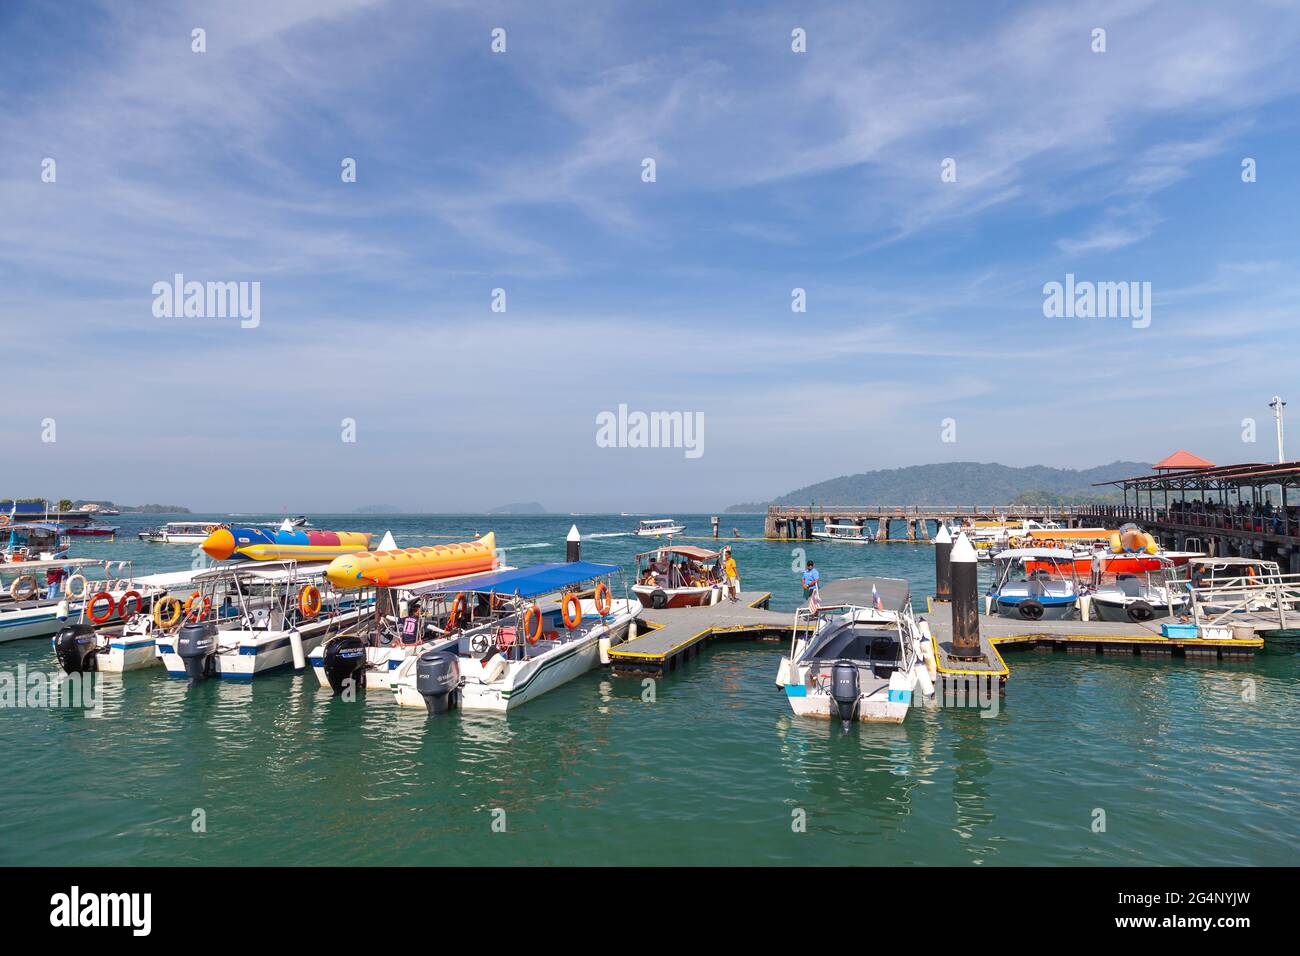 Kota Kinabalu, Malaysia - March 17, 2019: Small motorboats with passengers are near Jesselton Point ferry terminal at sunny day Stock Photo